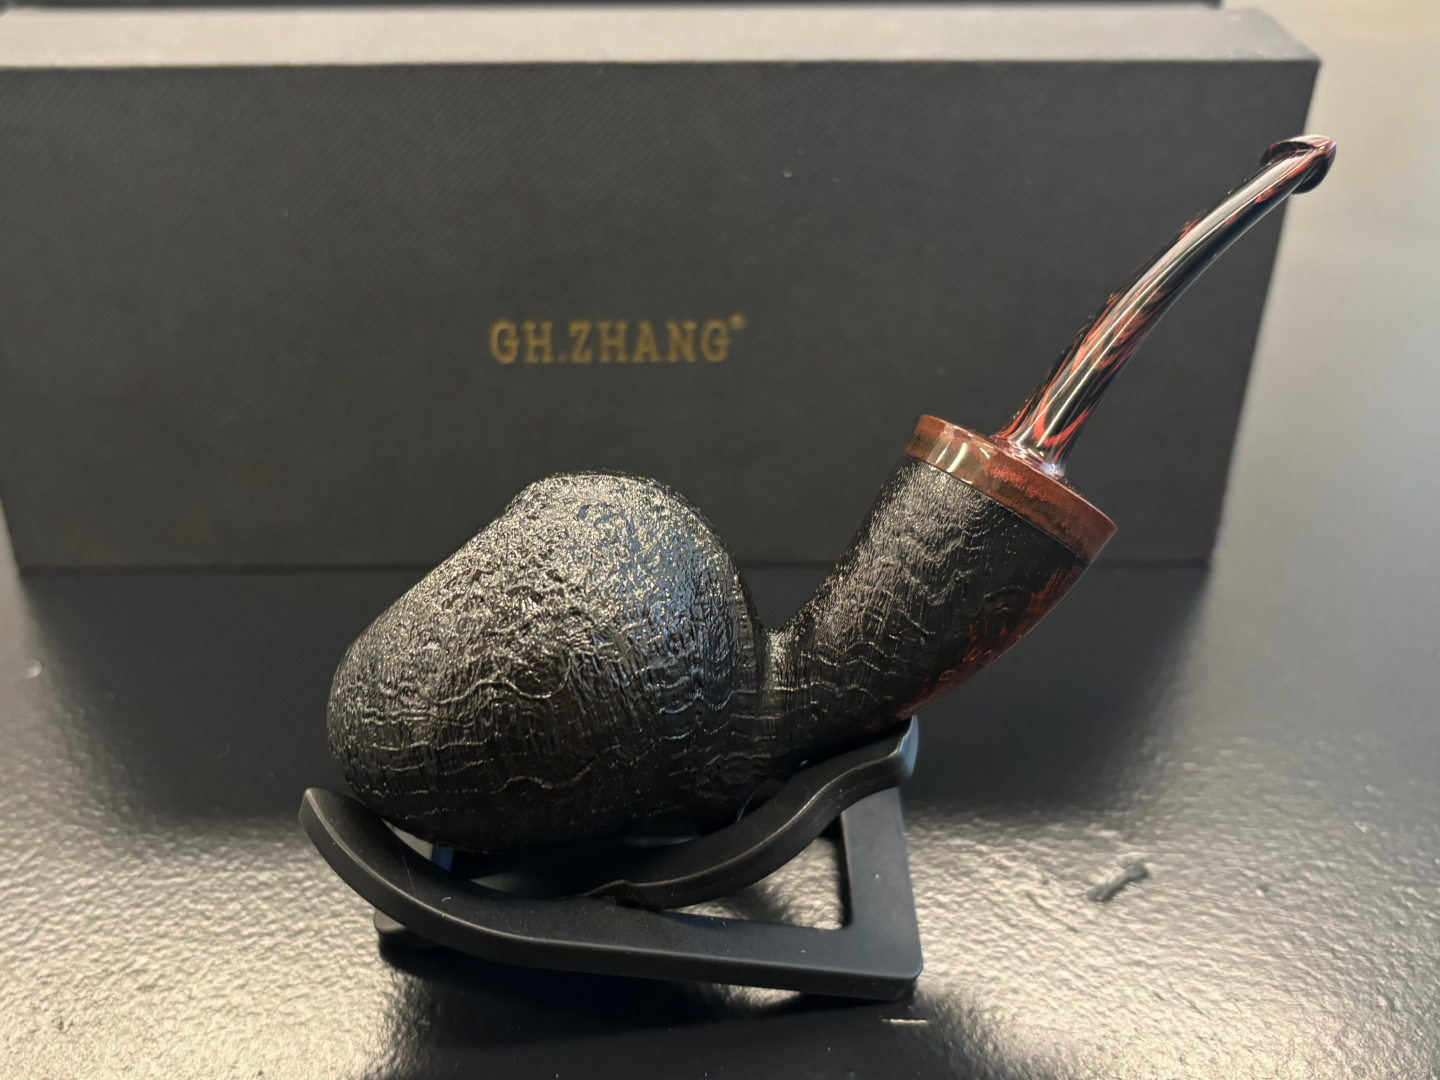 GH Zhang tobacco pipe